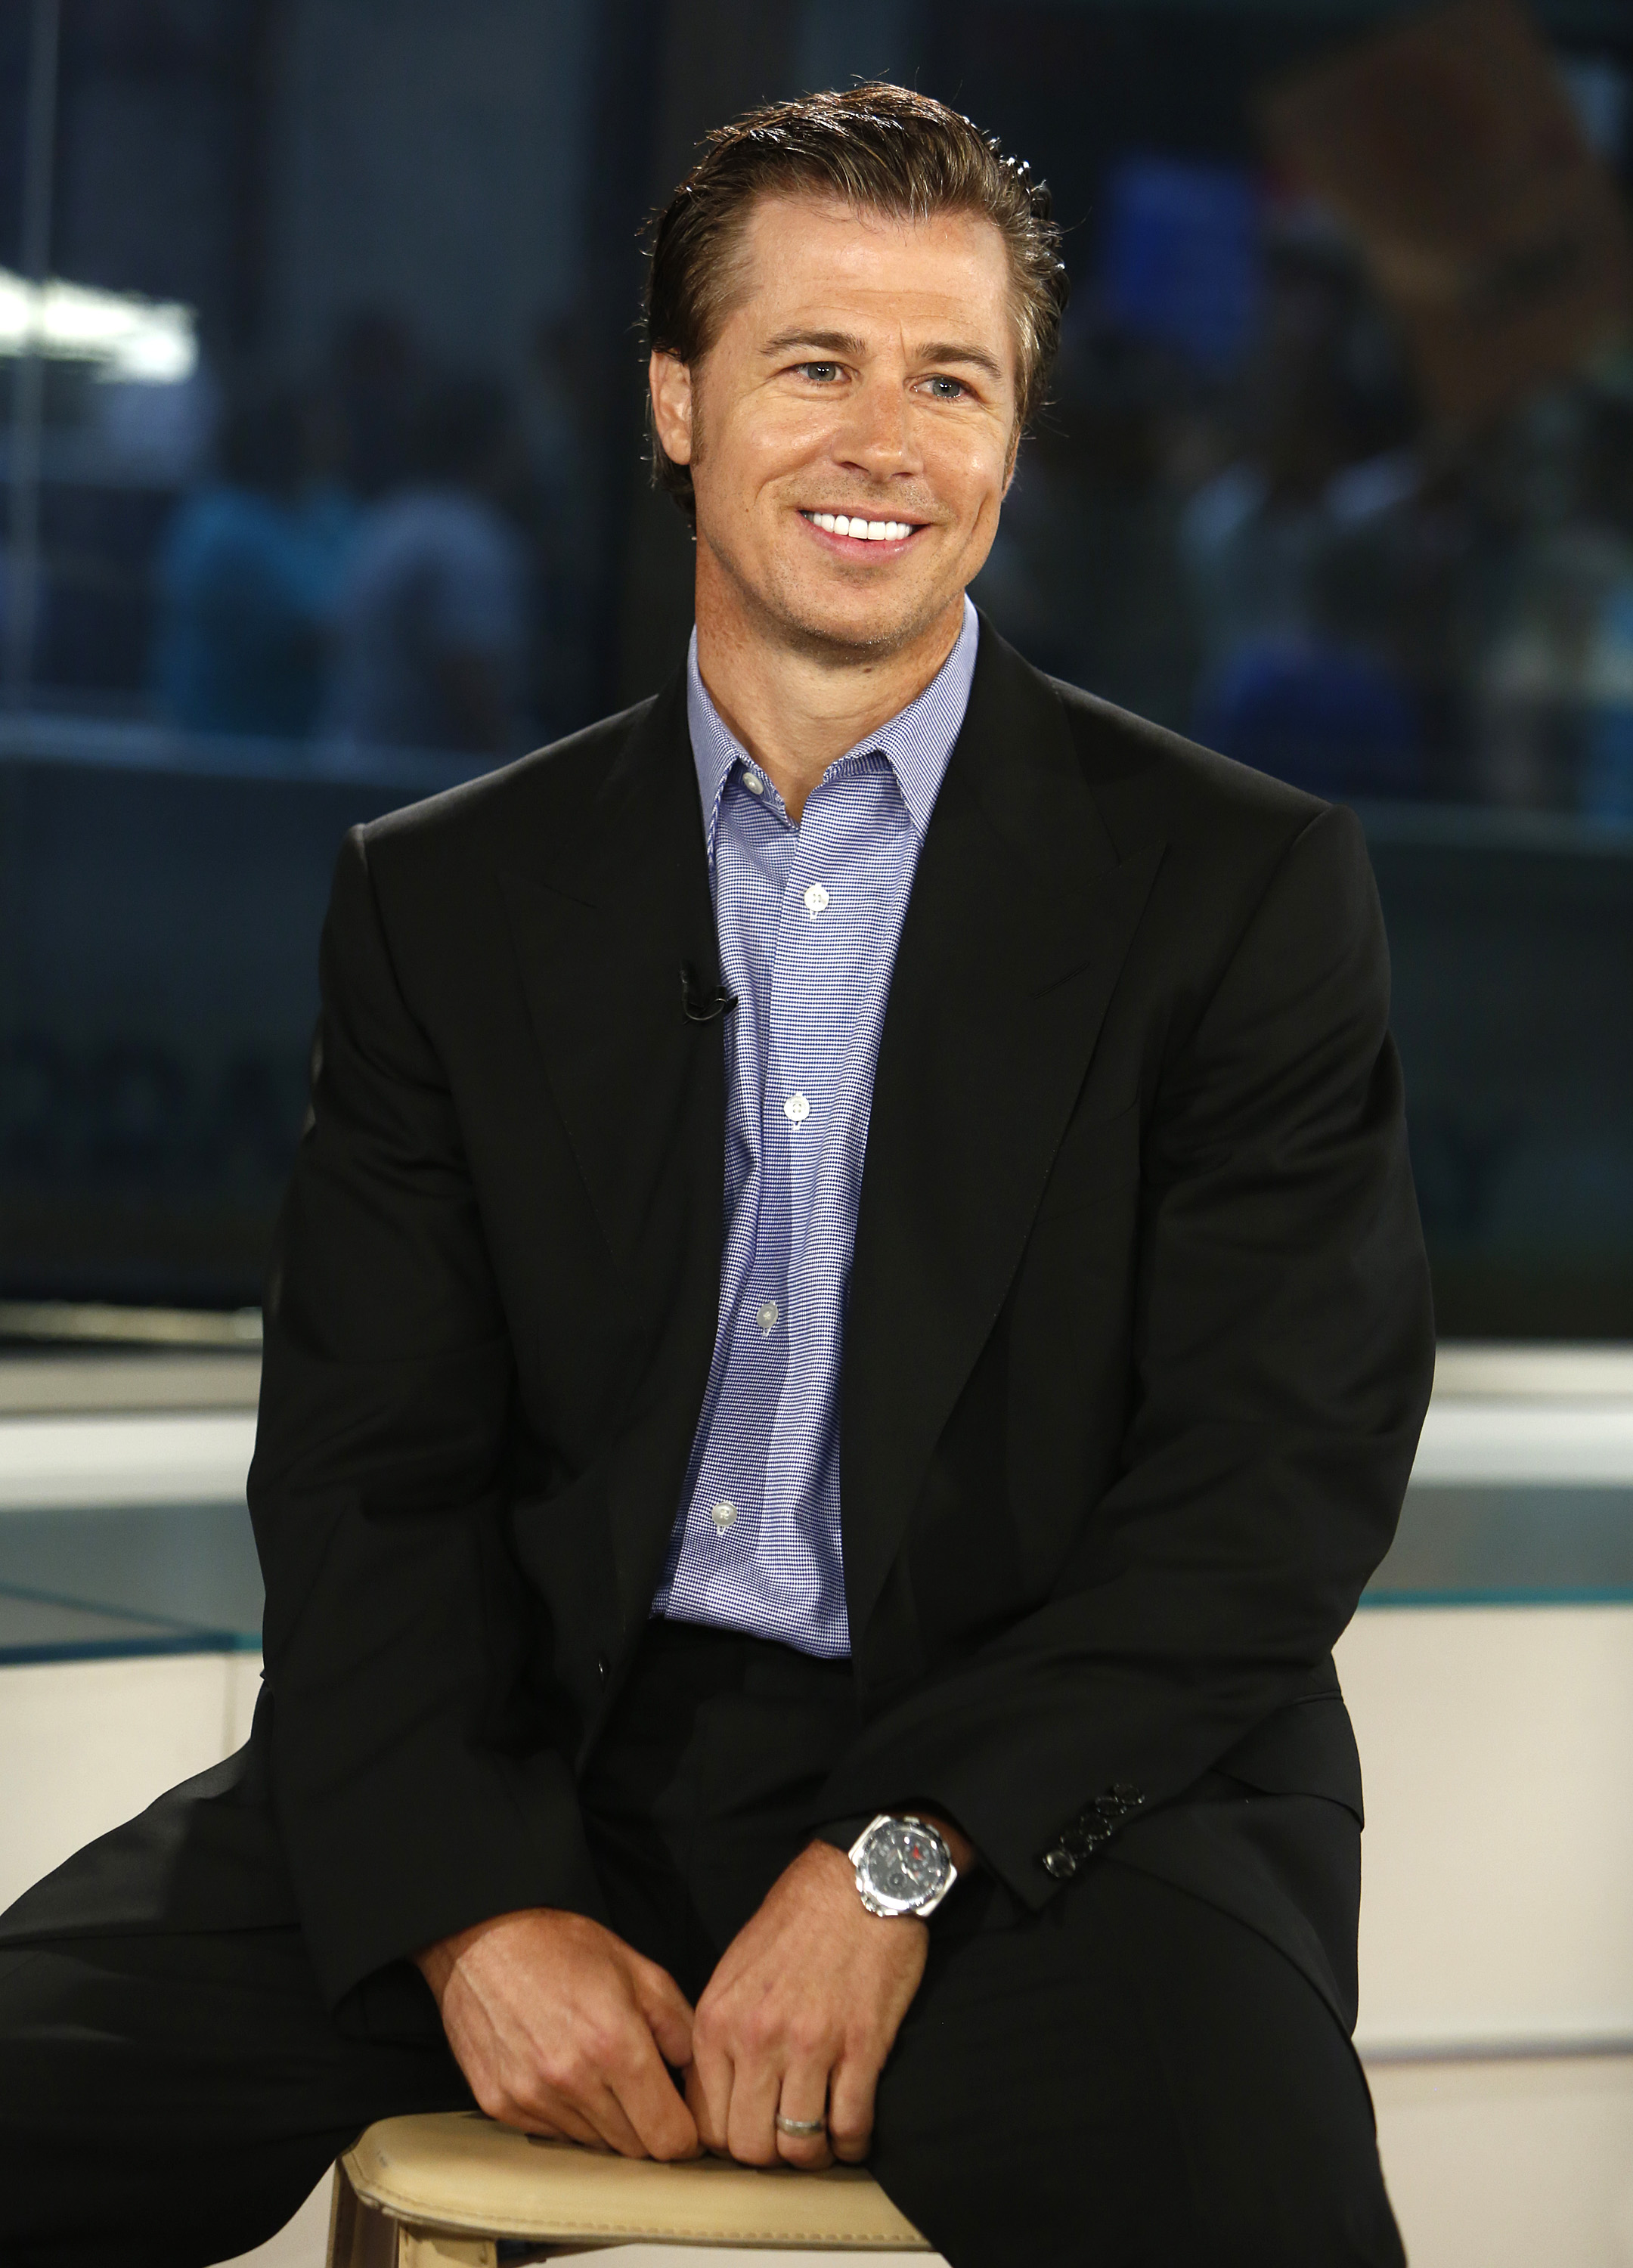 Doug Pitt makes an appearance on NBC News' "Today" show | Source: Getty Images